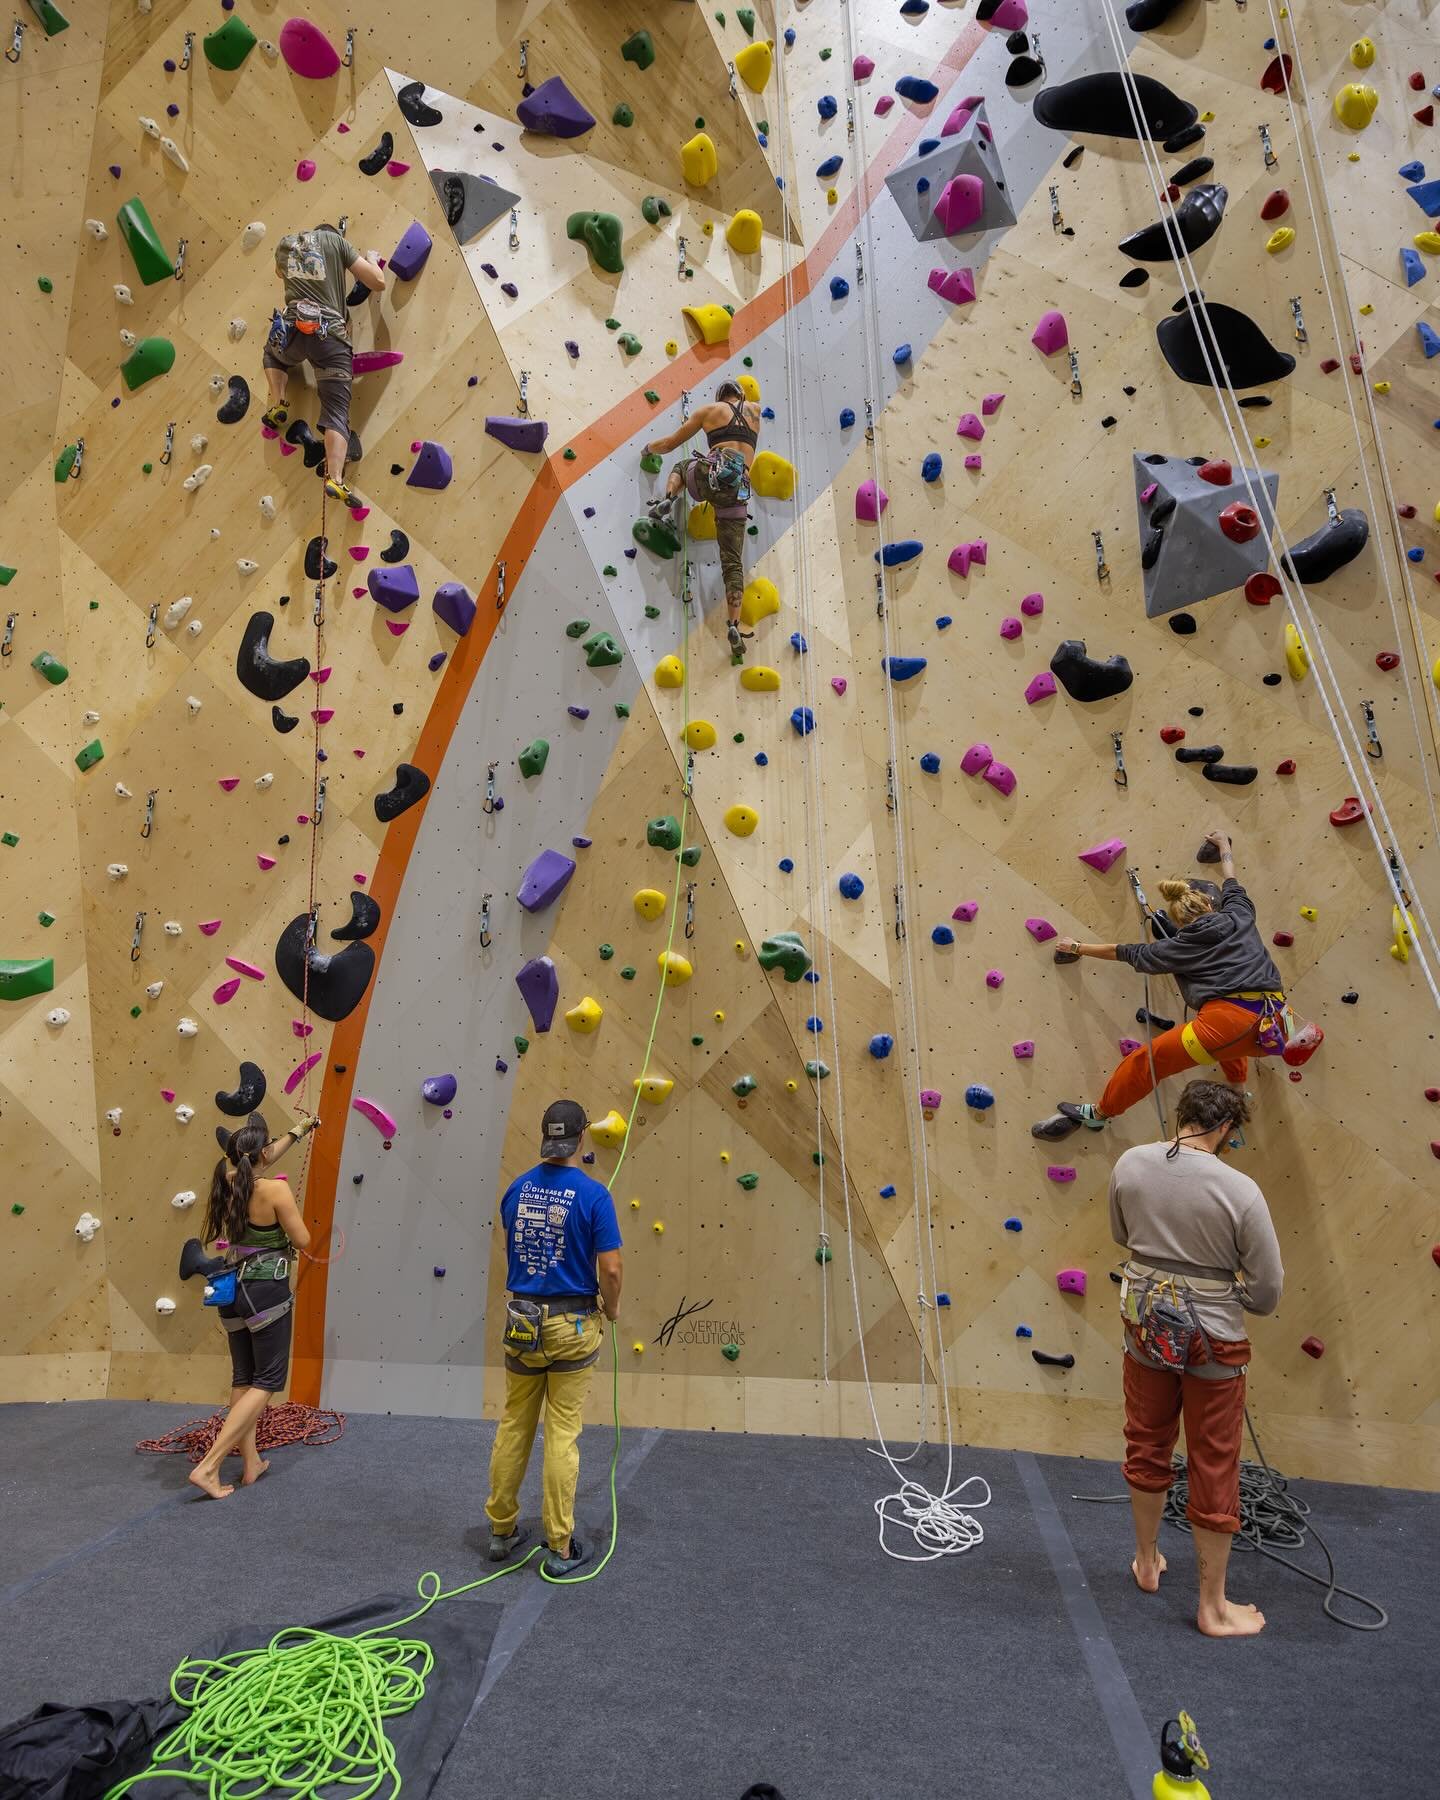 We have a few spots left in our Learn to Lead class that begins TONIGHT with Coach Erin! Sign up online or give us a call to secure your spot and unlock a whole new world of climbing.

Thursdays, April 11th &amp; 18th | 6:00 - 8:30 PM